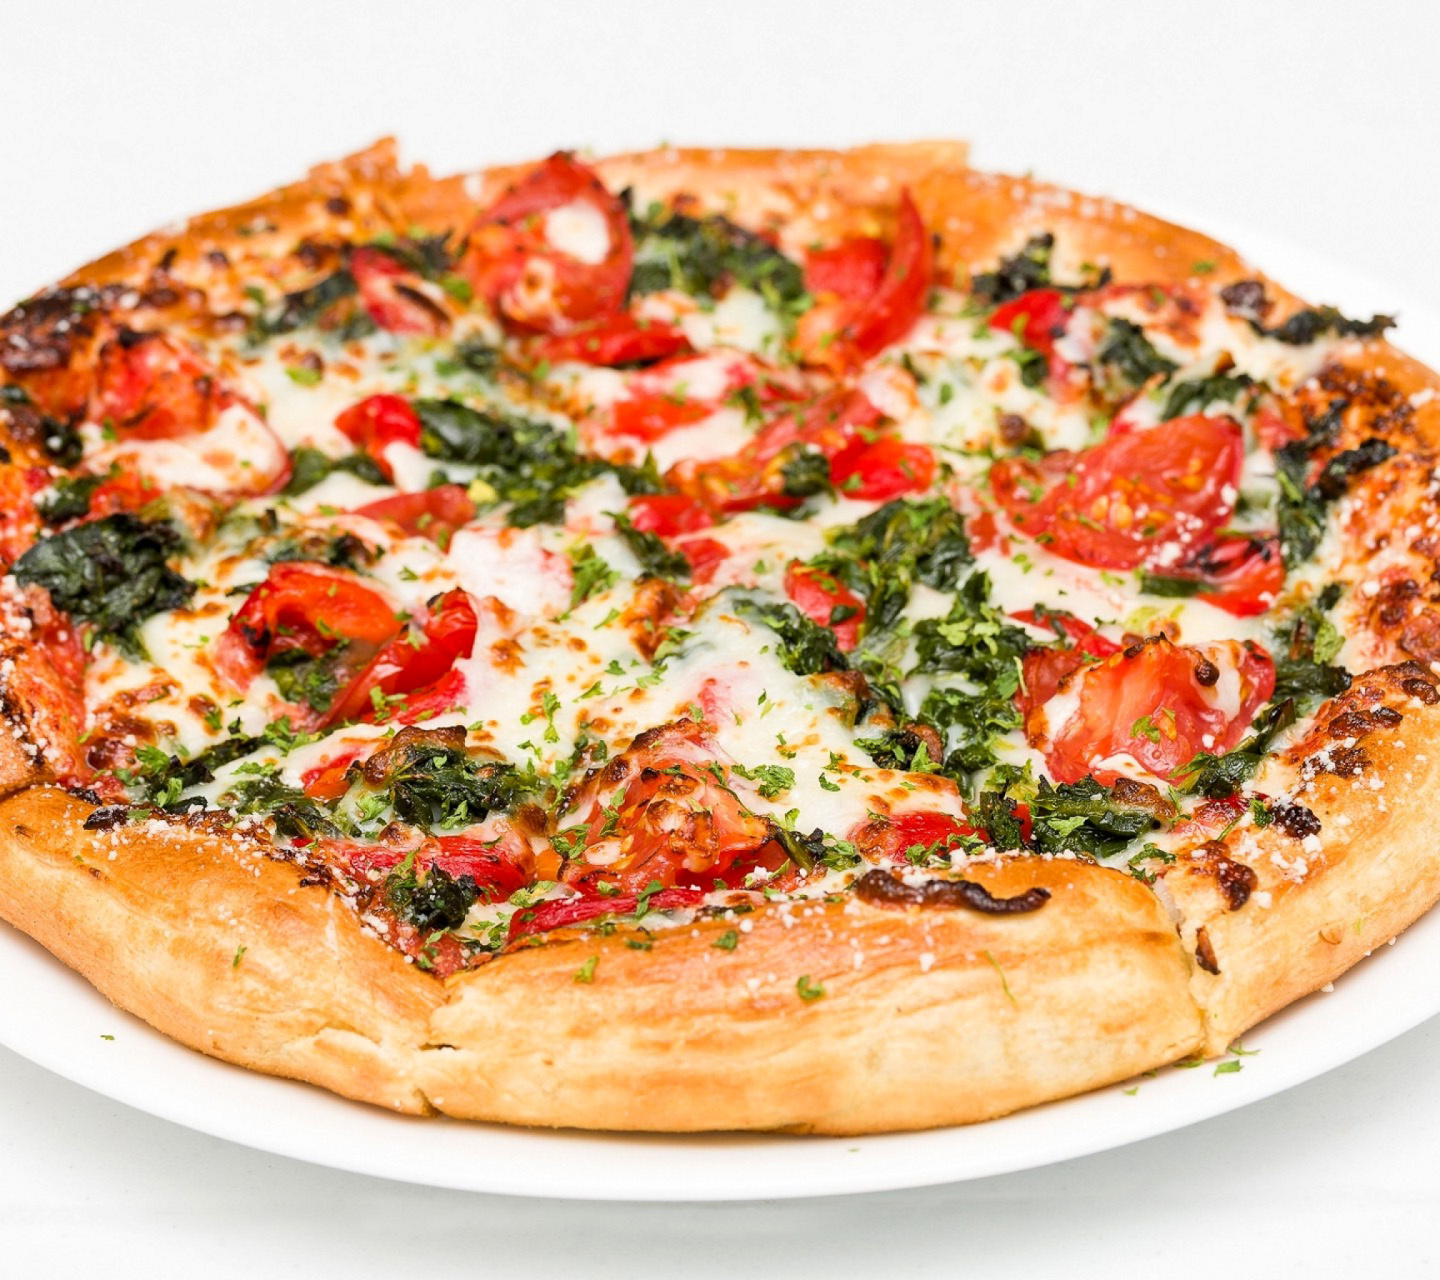 Pizza with spinach screenshot #1 1440x1280